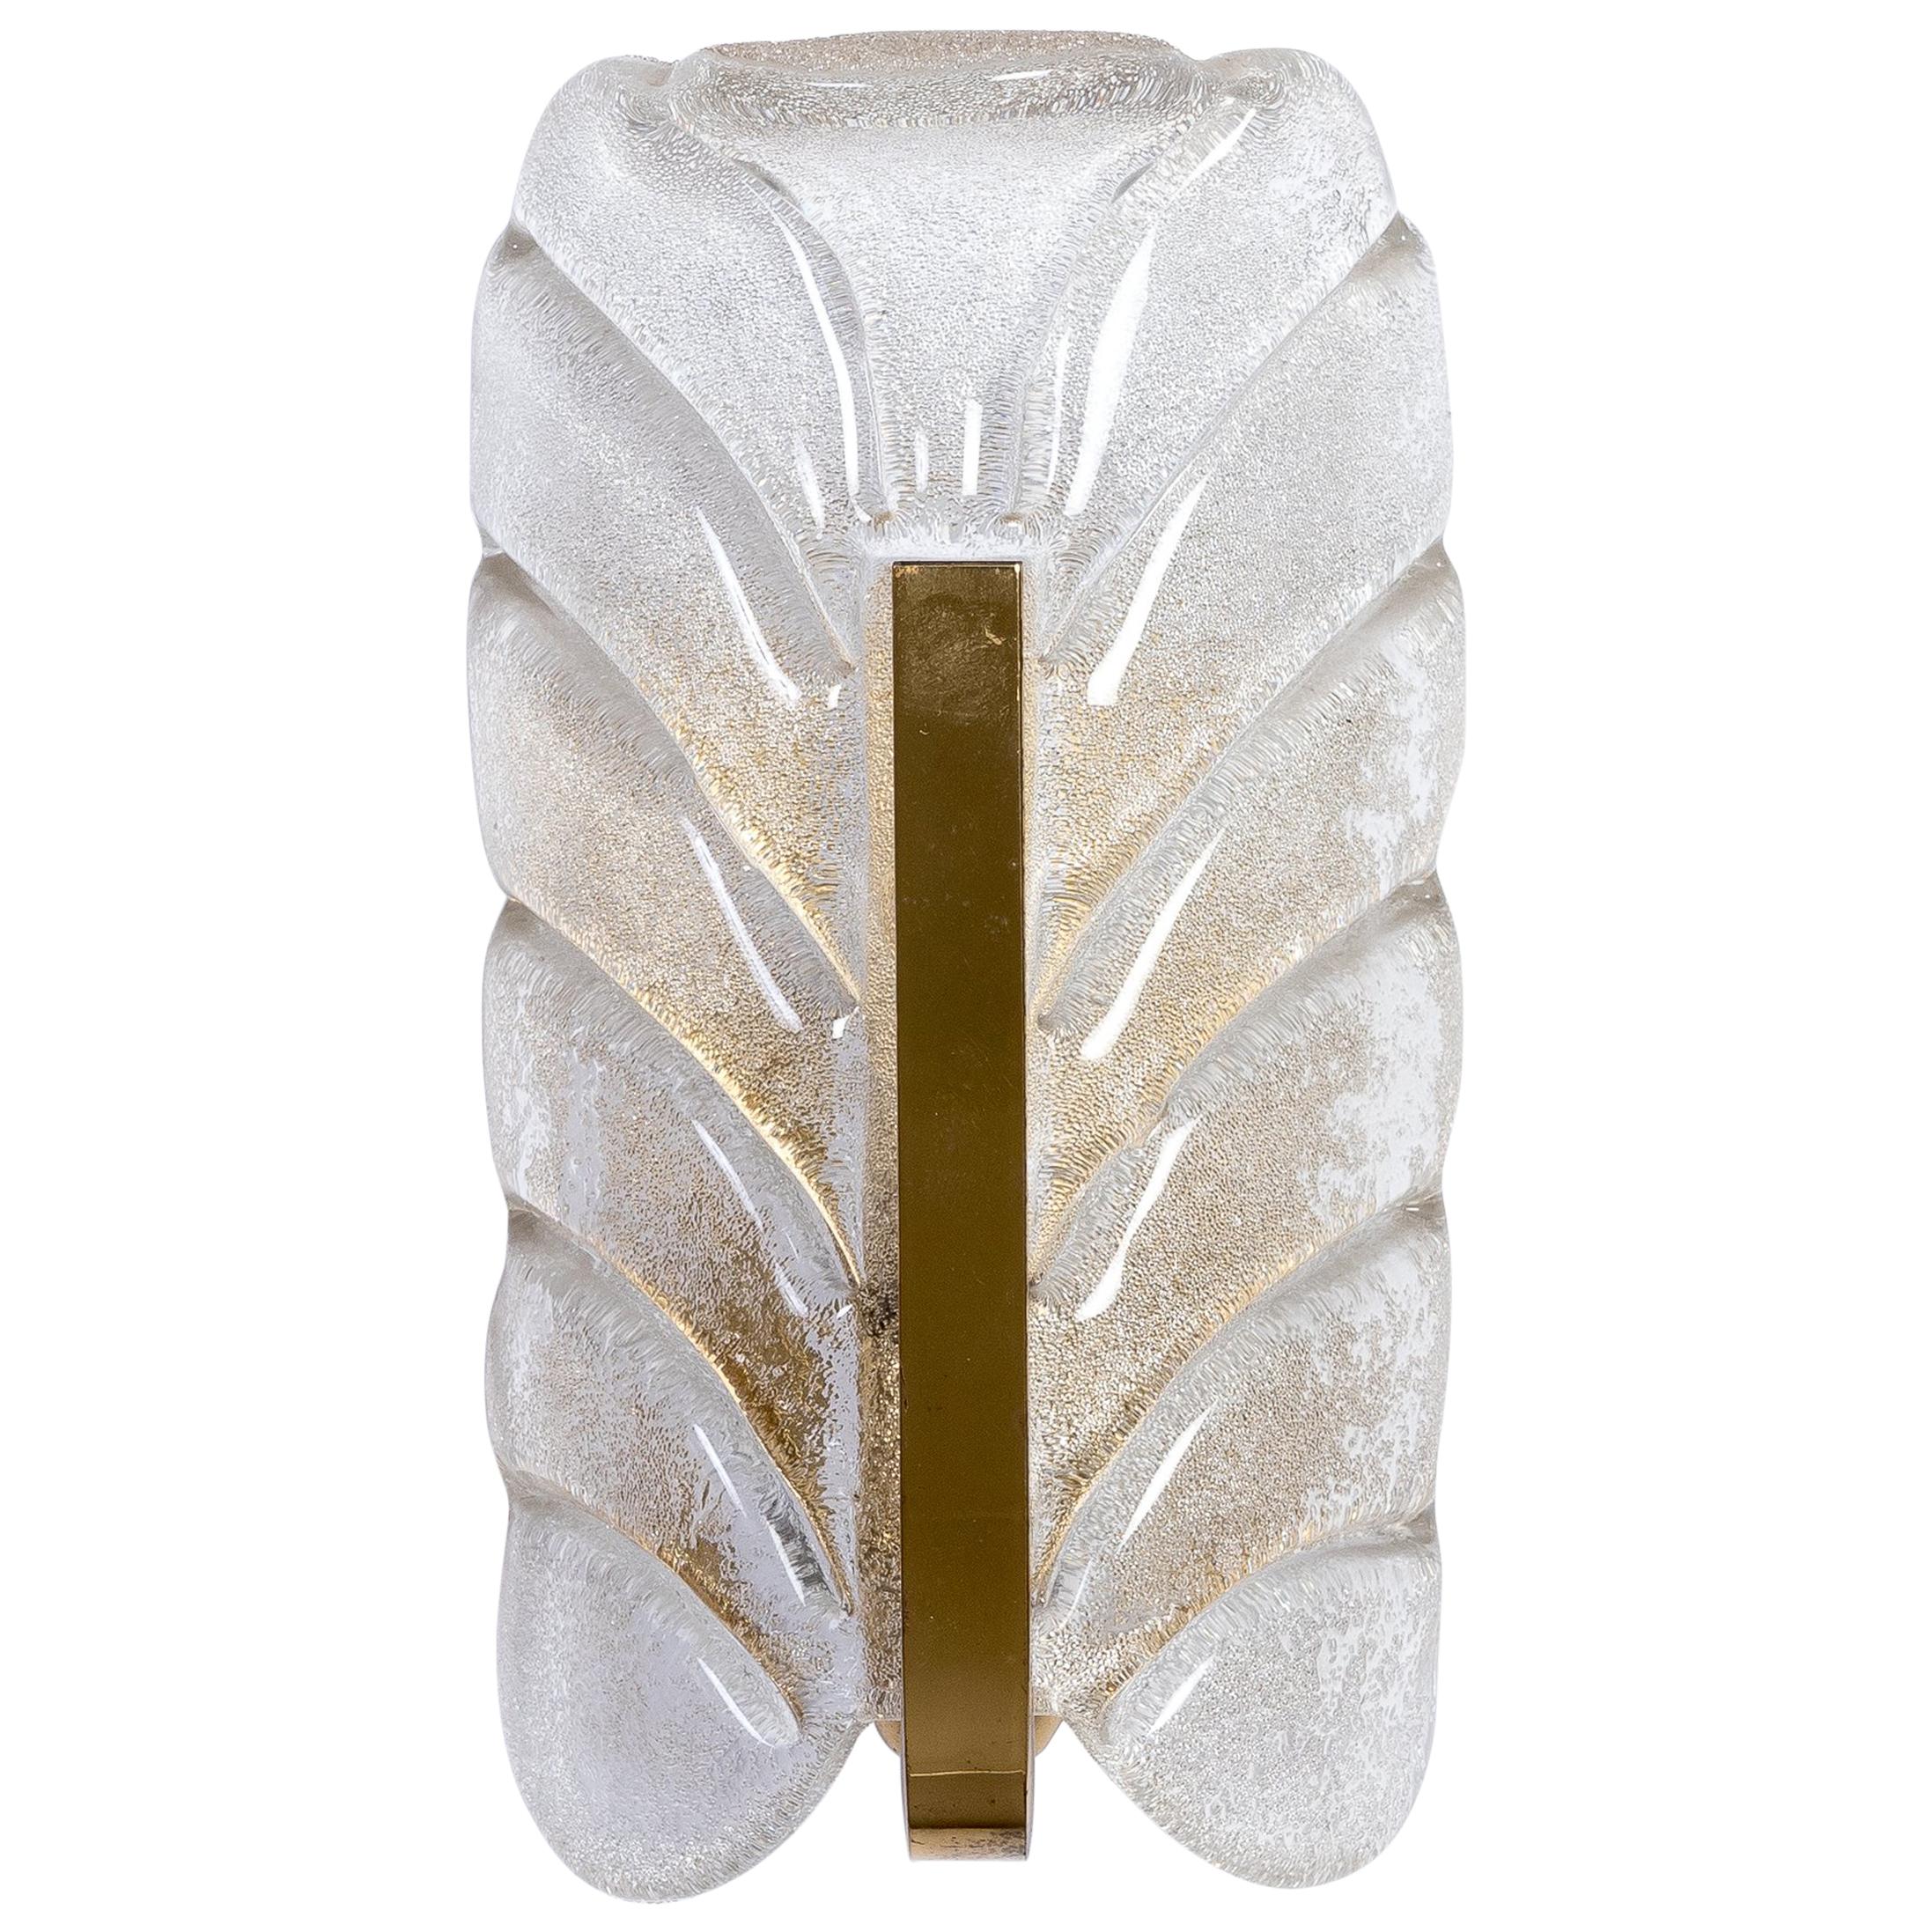 Exquisite Mid-Century Modernist Sconce by Carl Fagerlund for Orrefors